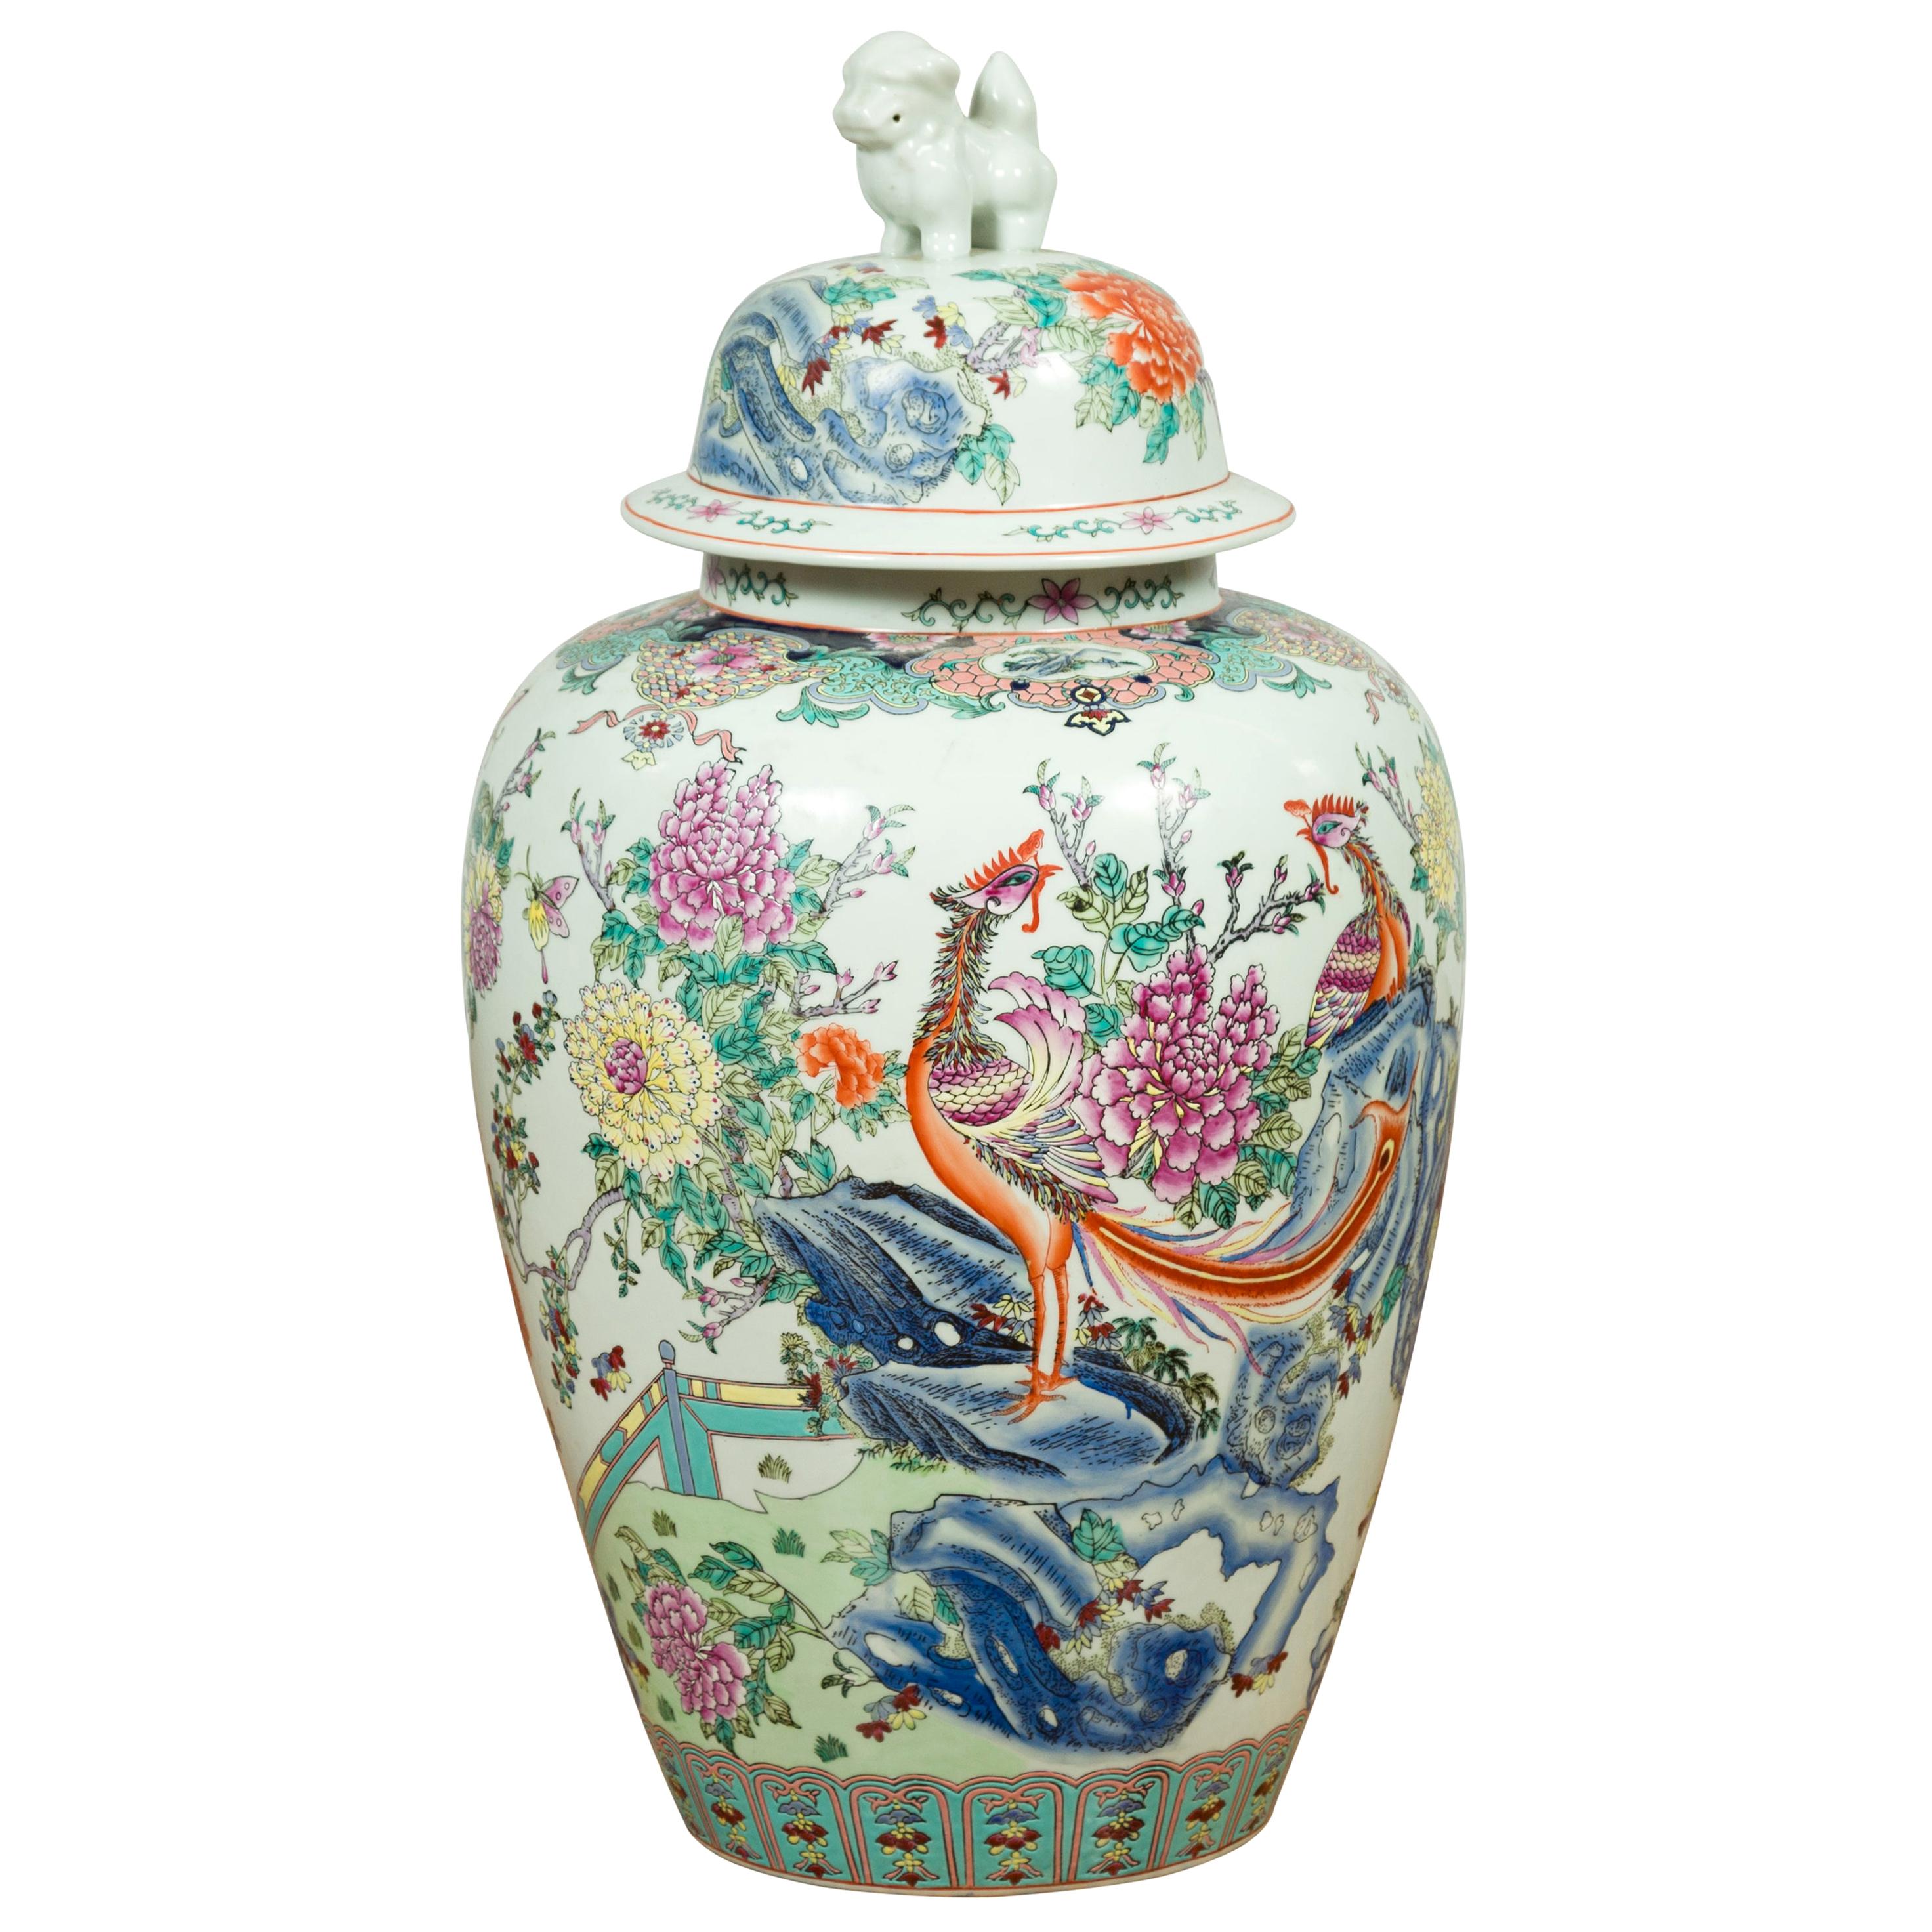 Vintage Chinese Hand Painted Porcelain Palace Jar, circa 1960 with Phoenix Motif